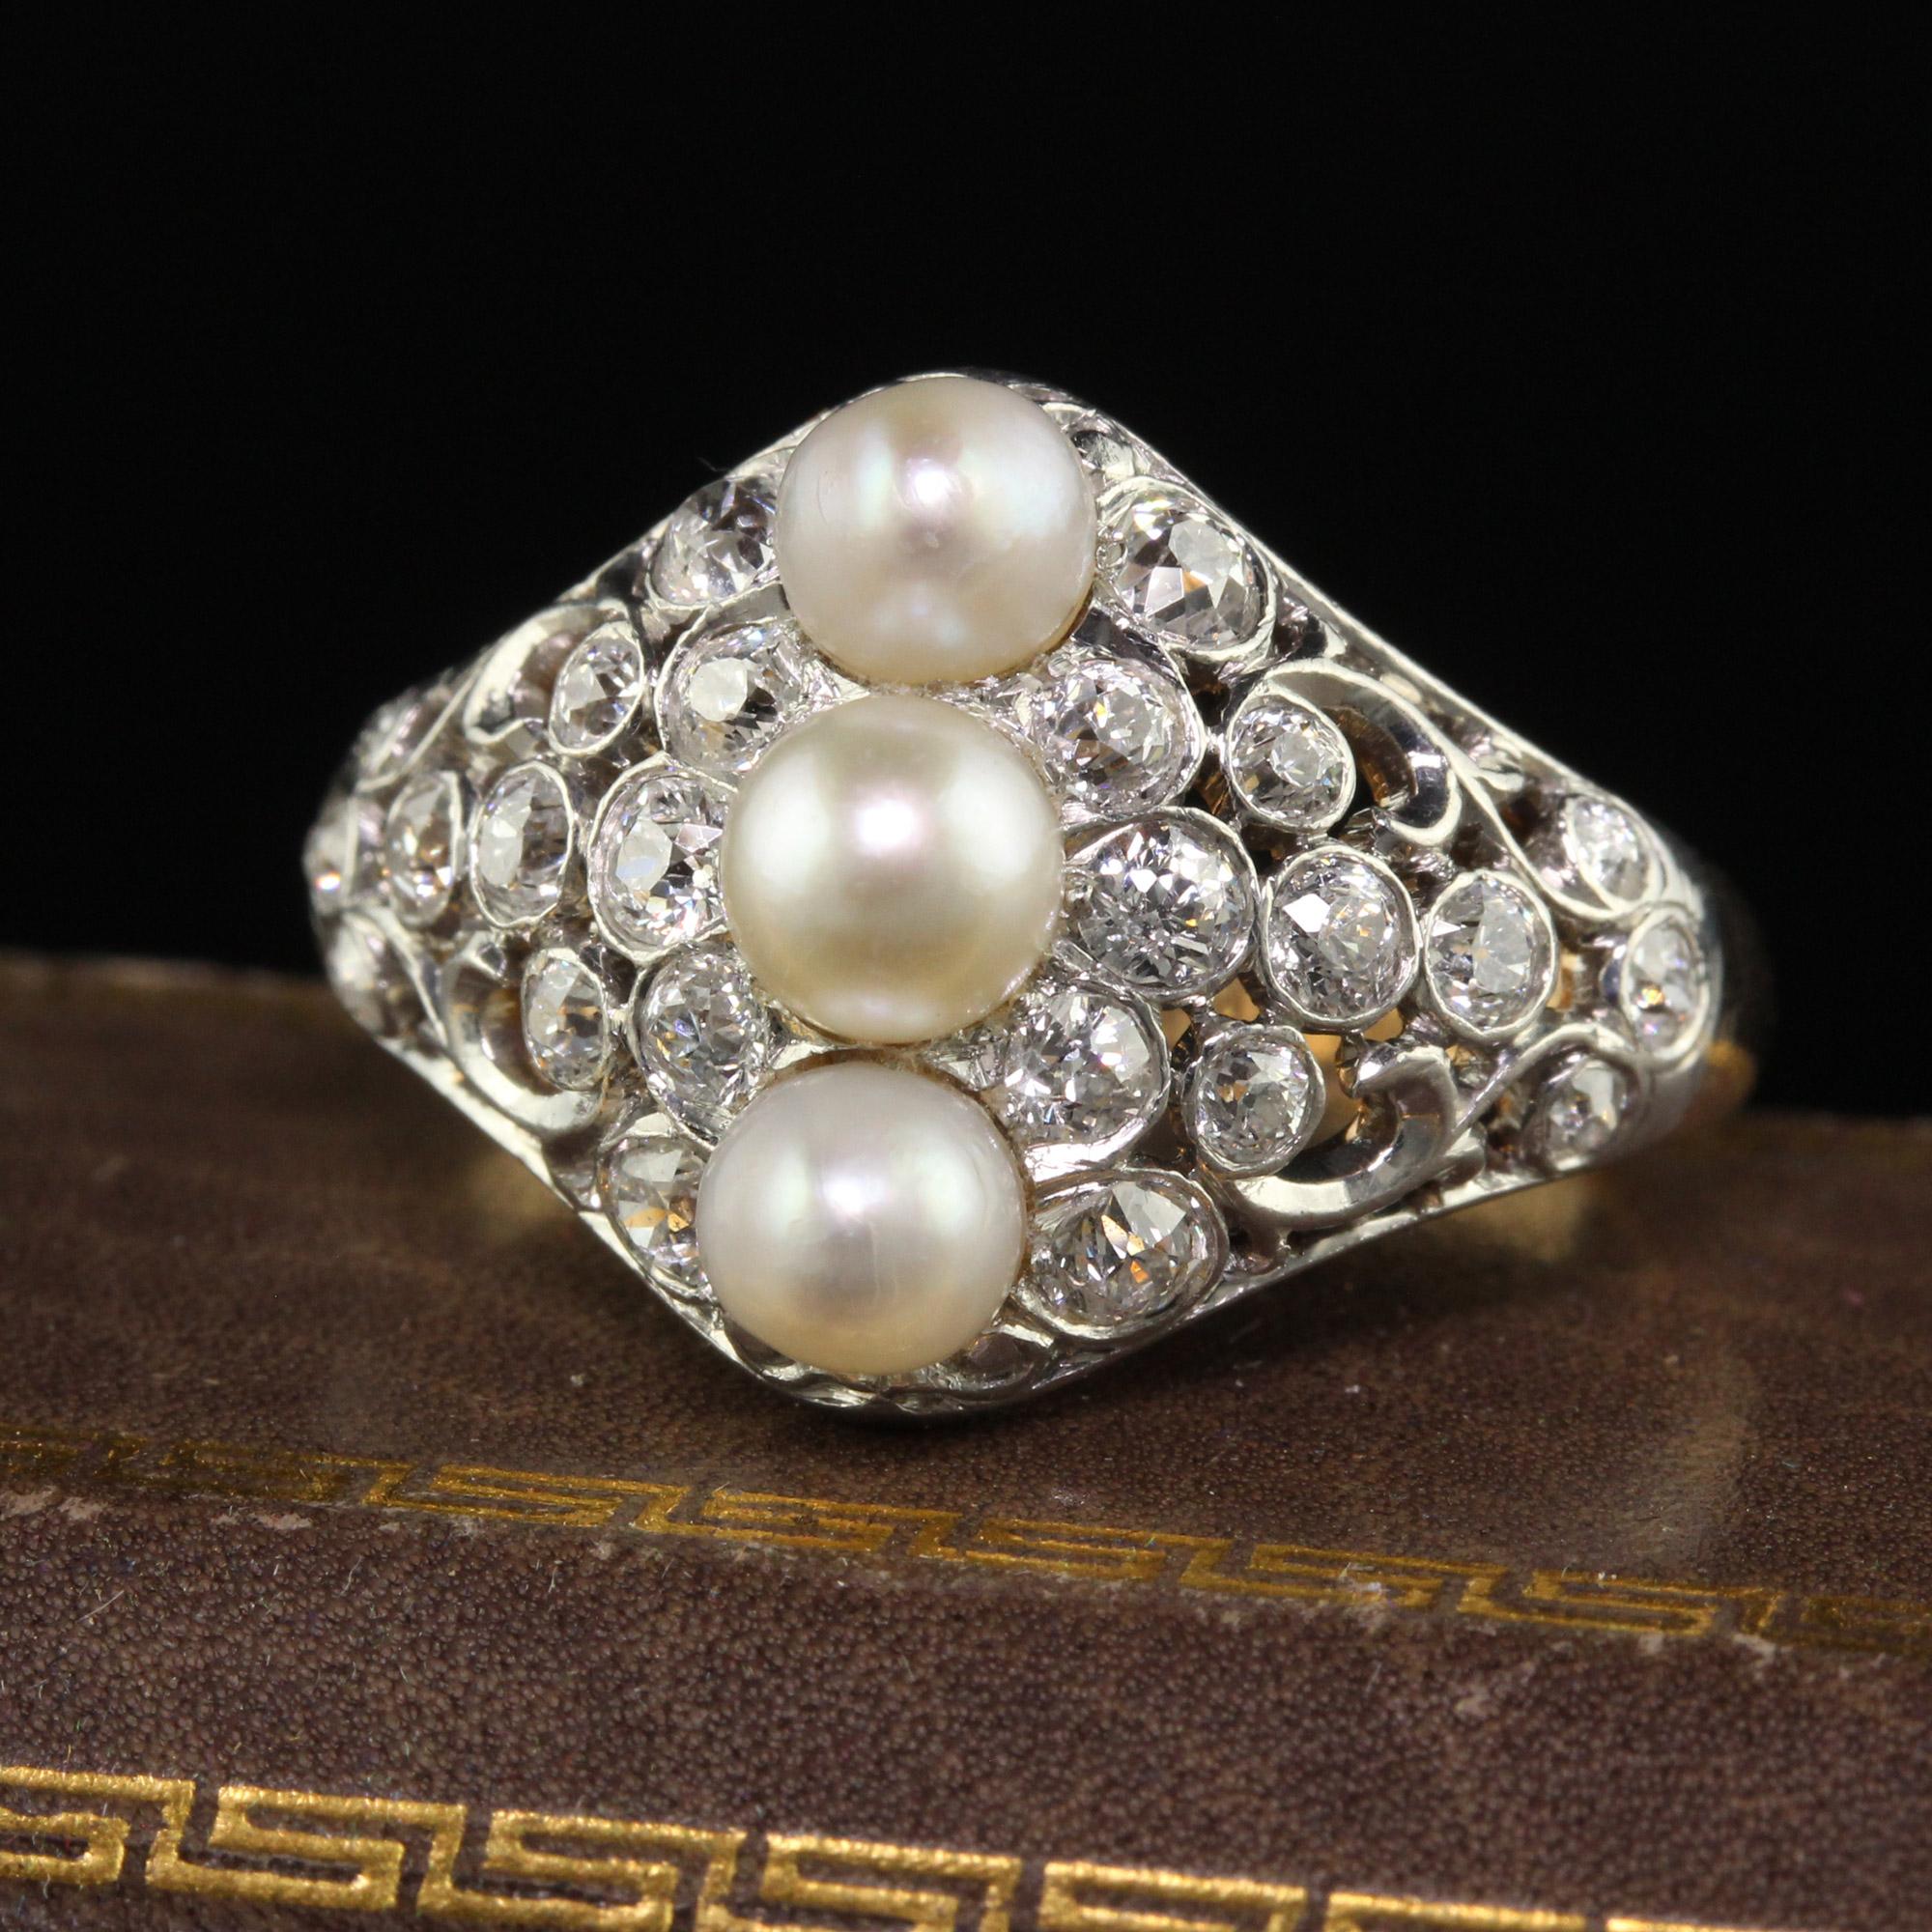 Beautiful Antique Edwardian Spaulding and Co 18K Gold Platinum Old Euro Diamond Pearl Ring. This gorgeous three stone pearl ring is crafted in 18k yellow gold and platinum. The center of the ring has  a row of three natural pearls and is surrounded